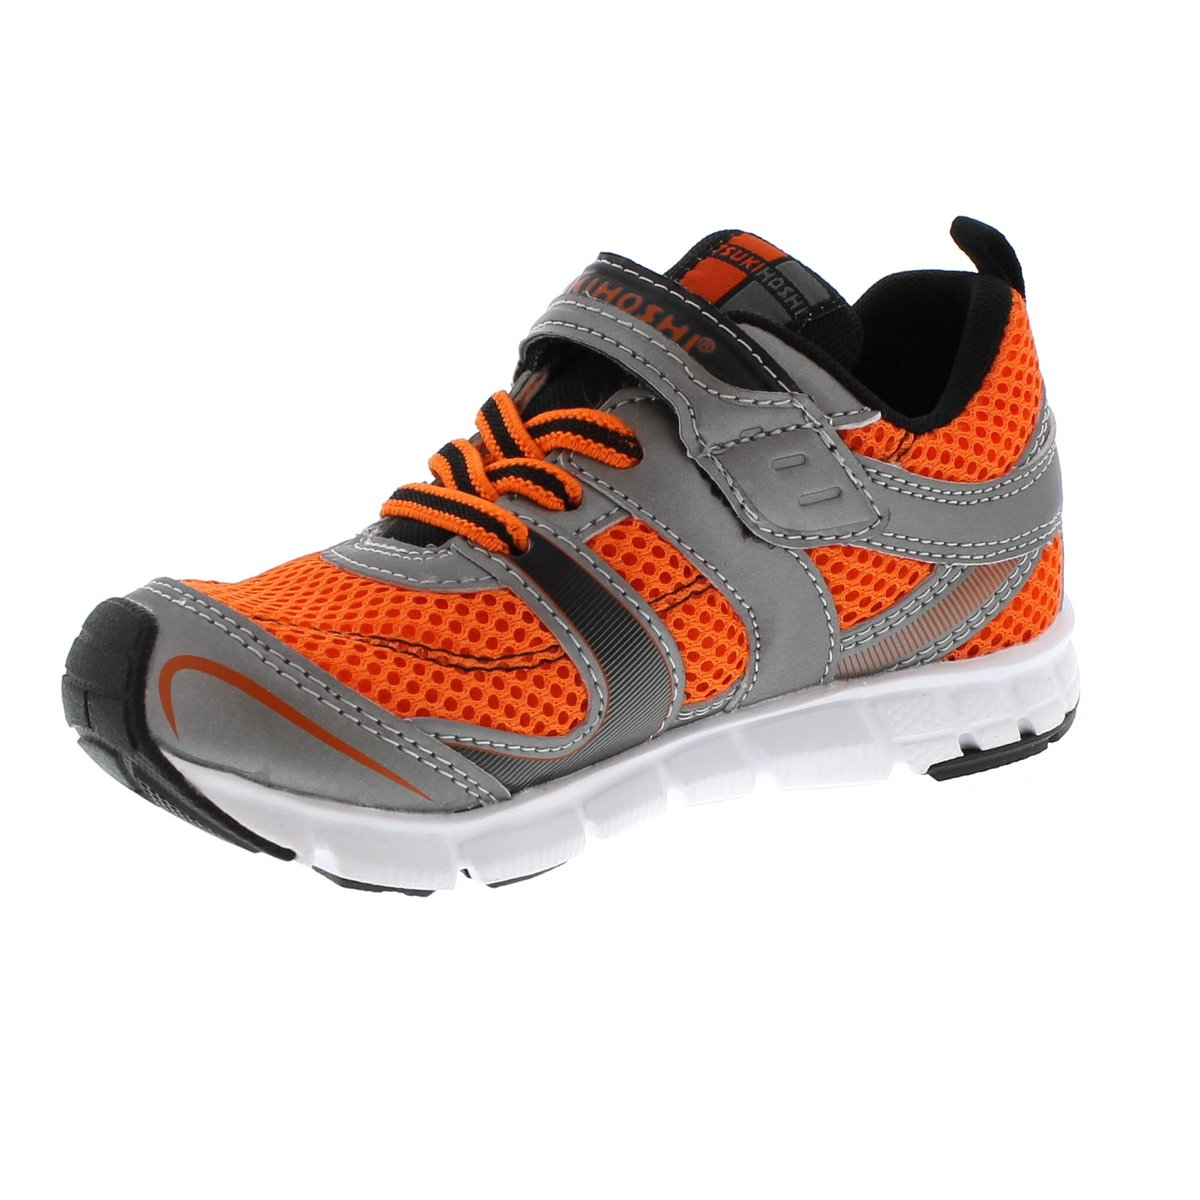 Child Tsukihoshi Velocity Sneaker in Silver/Orange from the front view